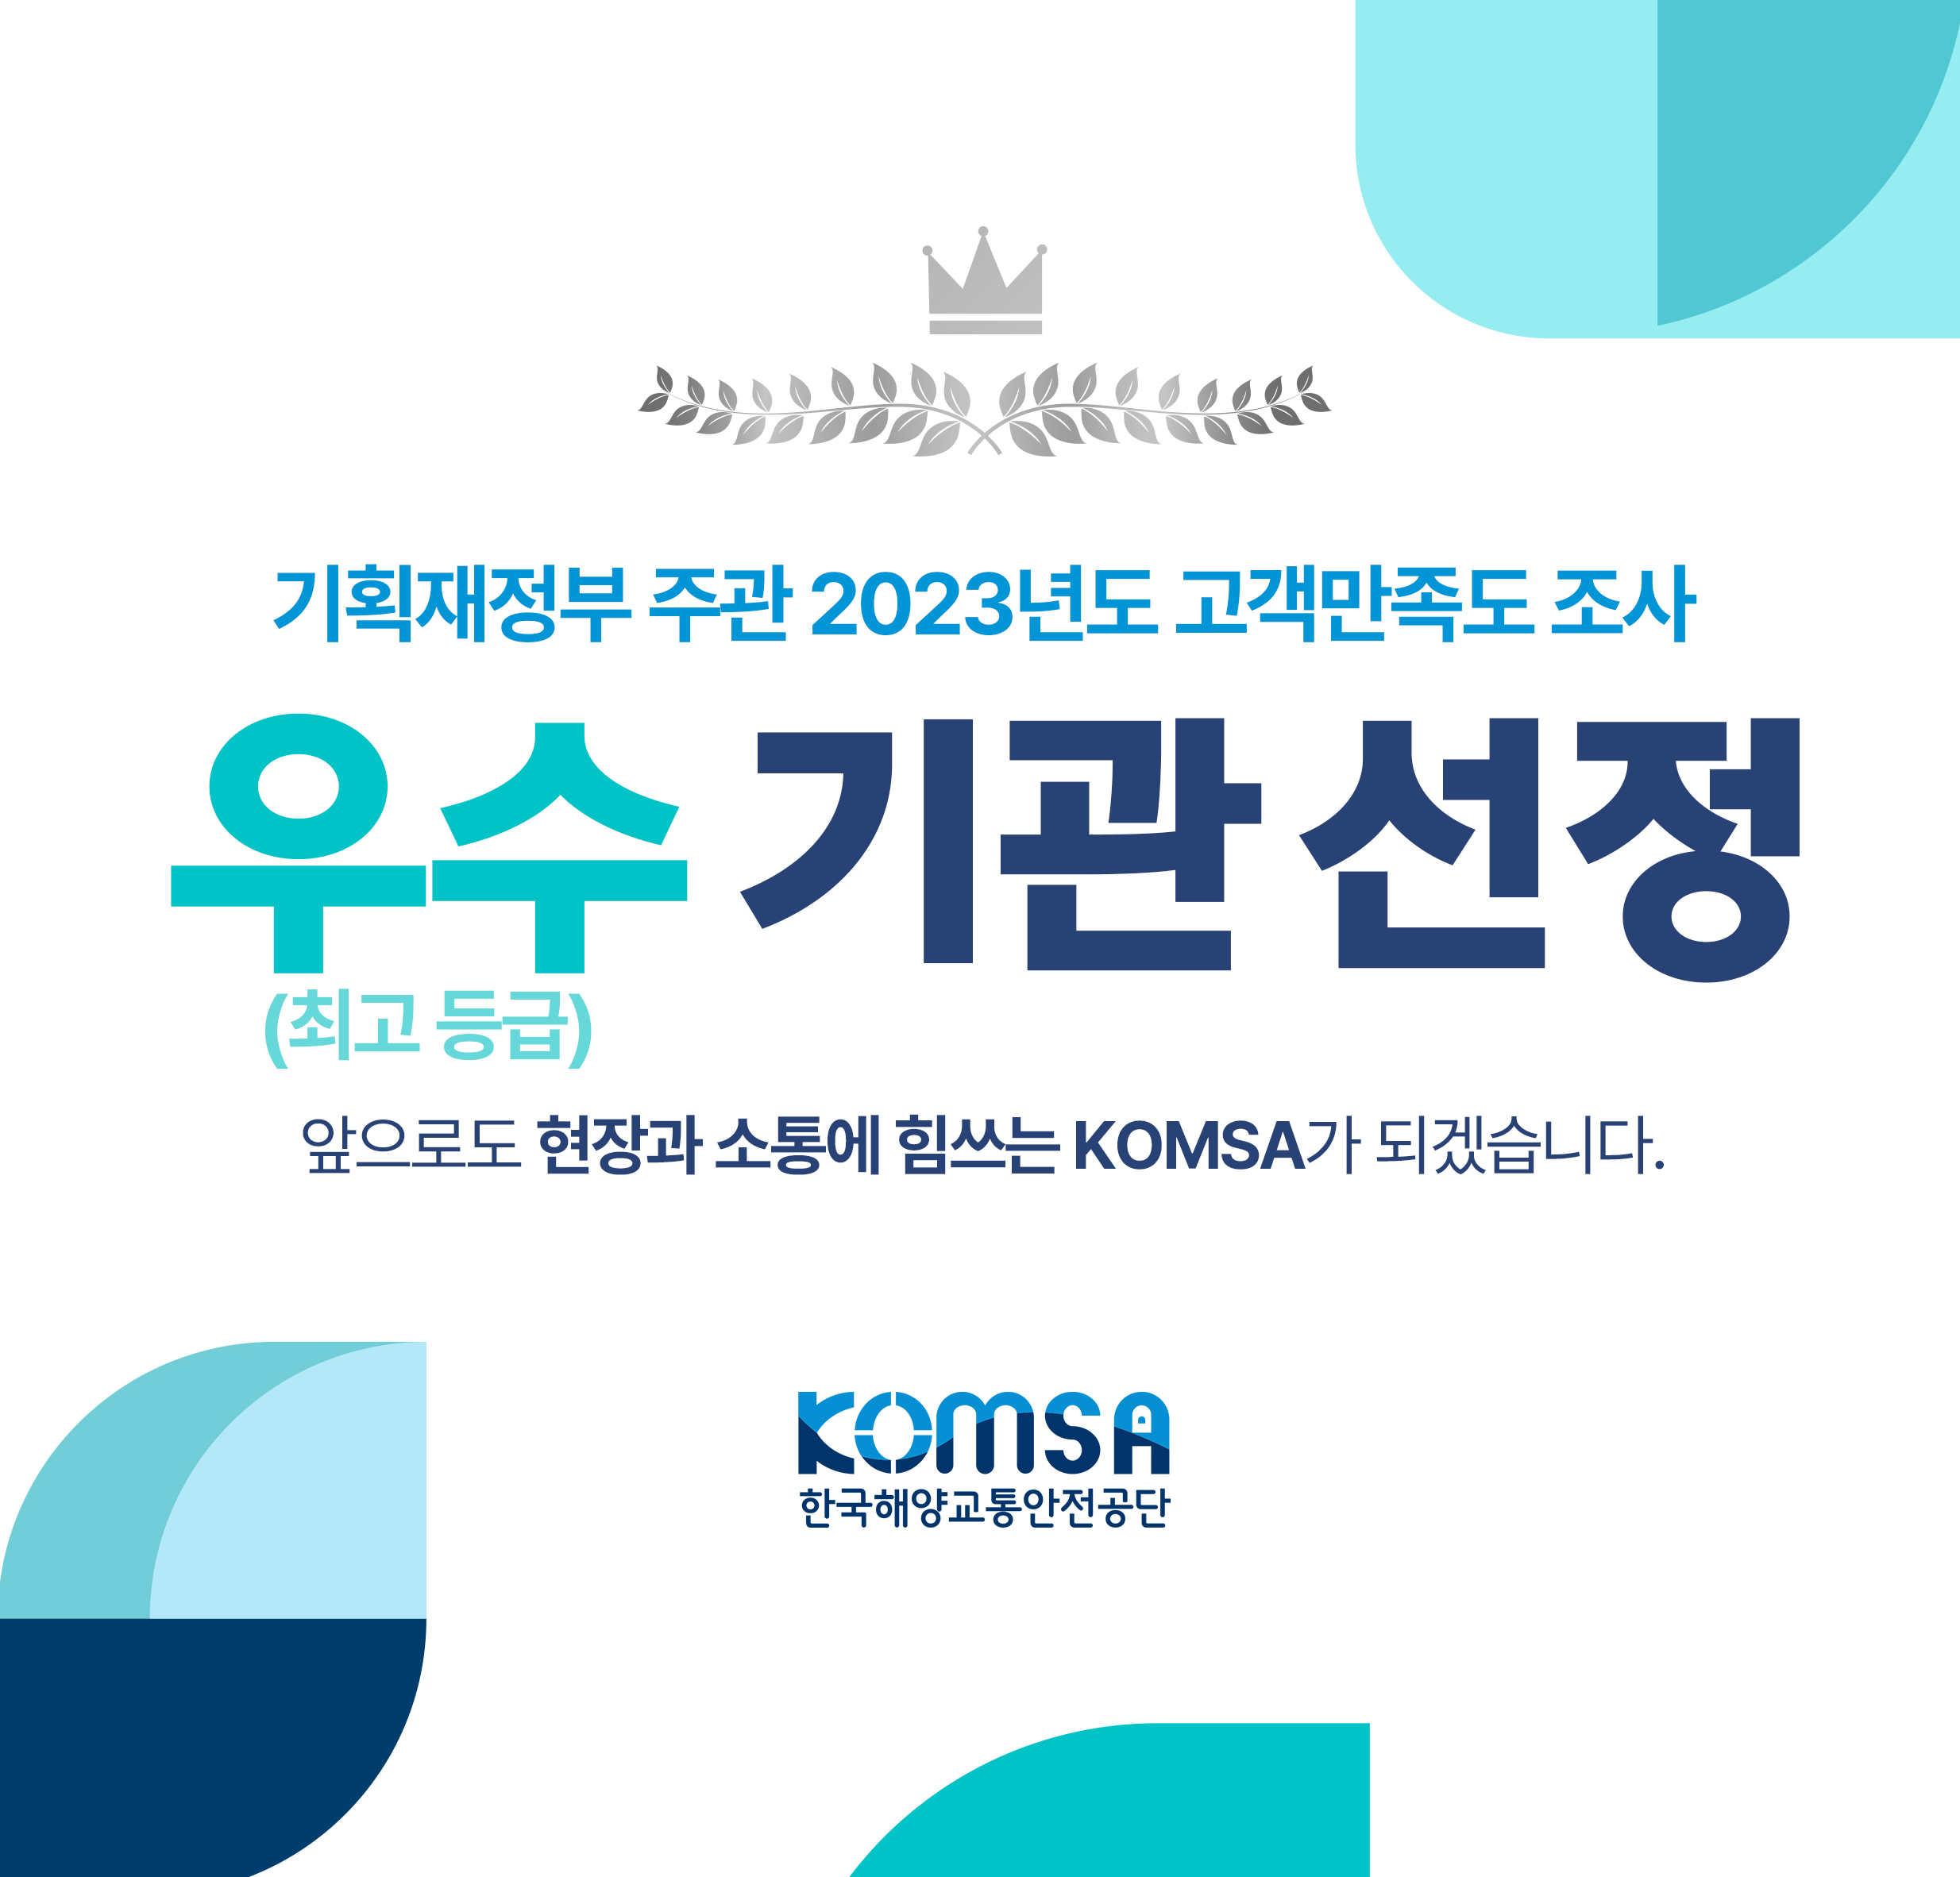 https://www.komsa.or.kr/kor/;jsessionid=CCED23CE9A5AC2BC971BE2B53D72A007